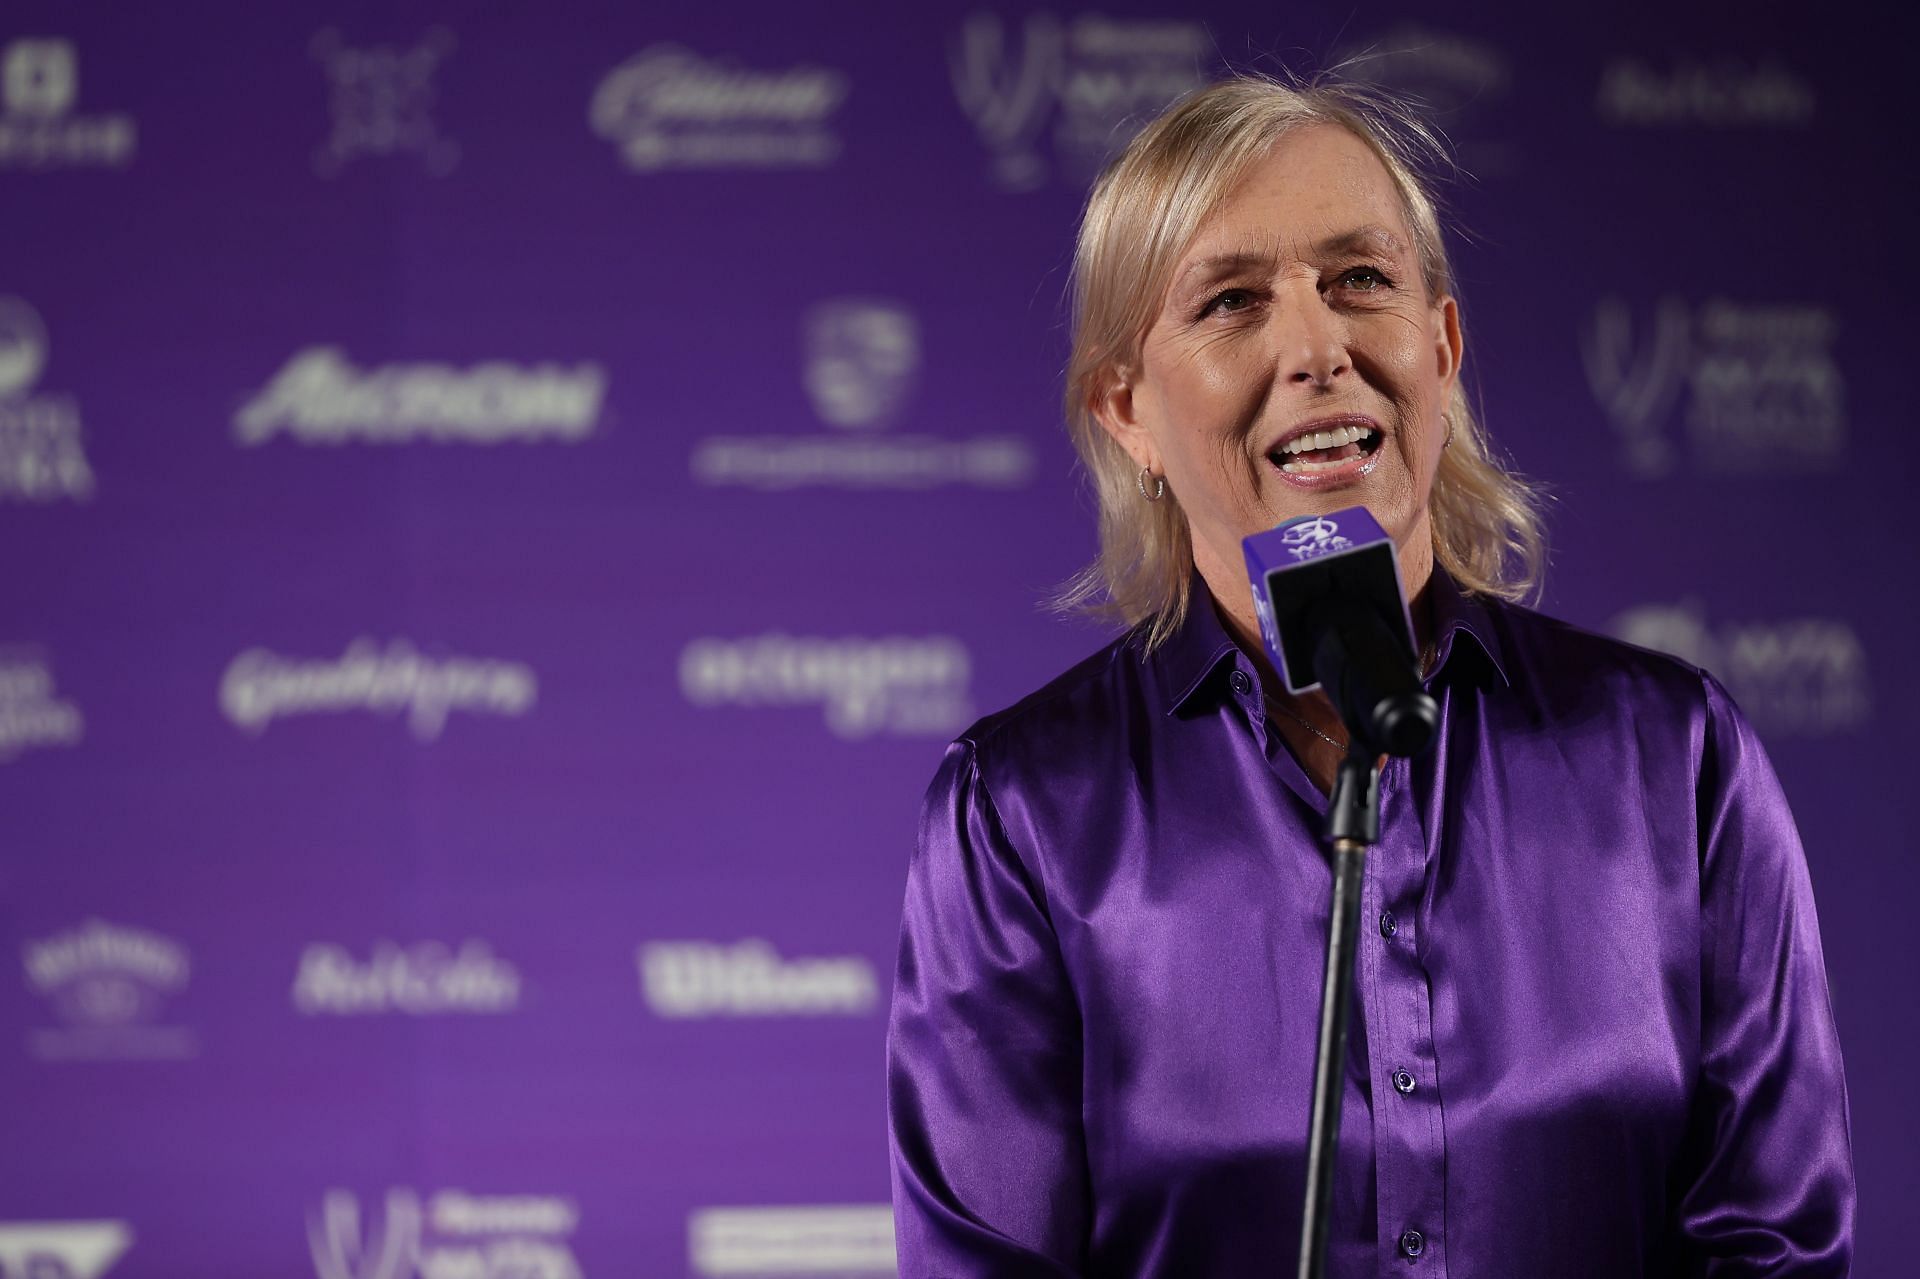 Navratilova opened up about her fight with breast cancer in a recent interview